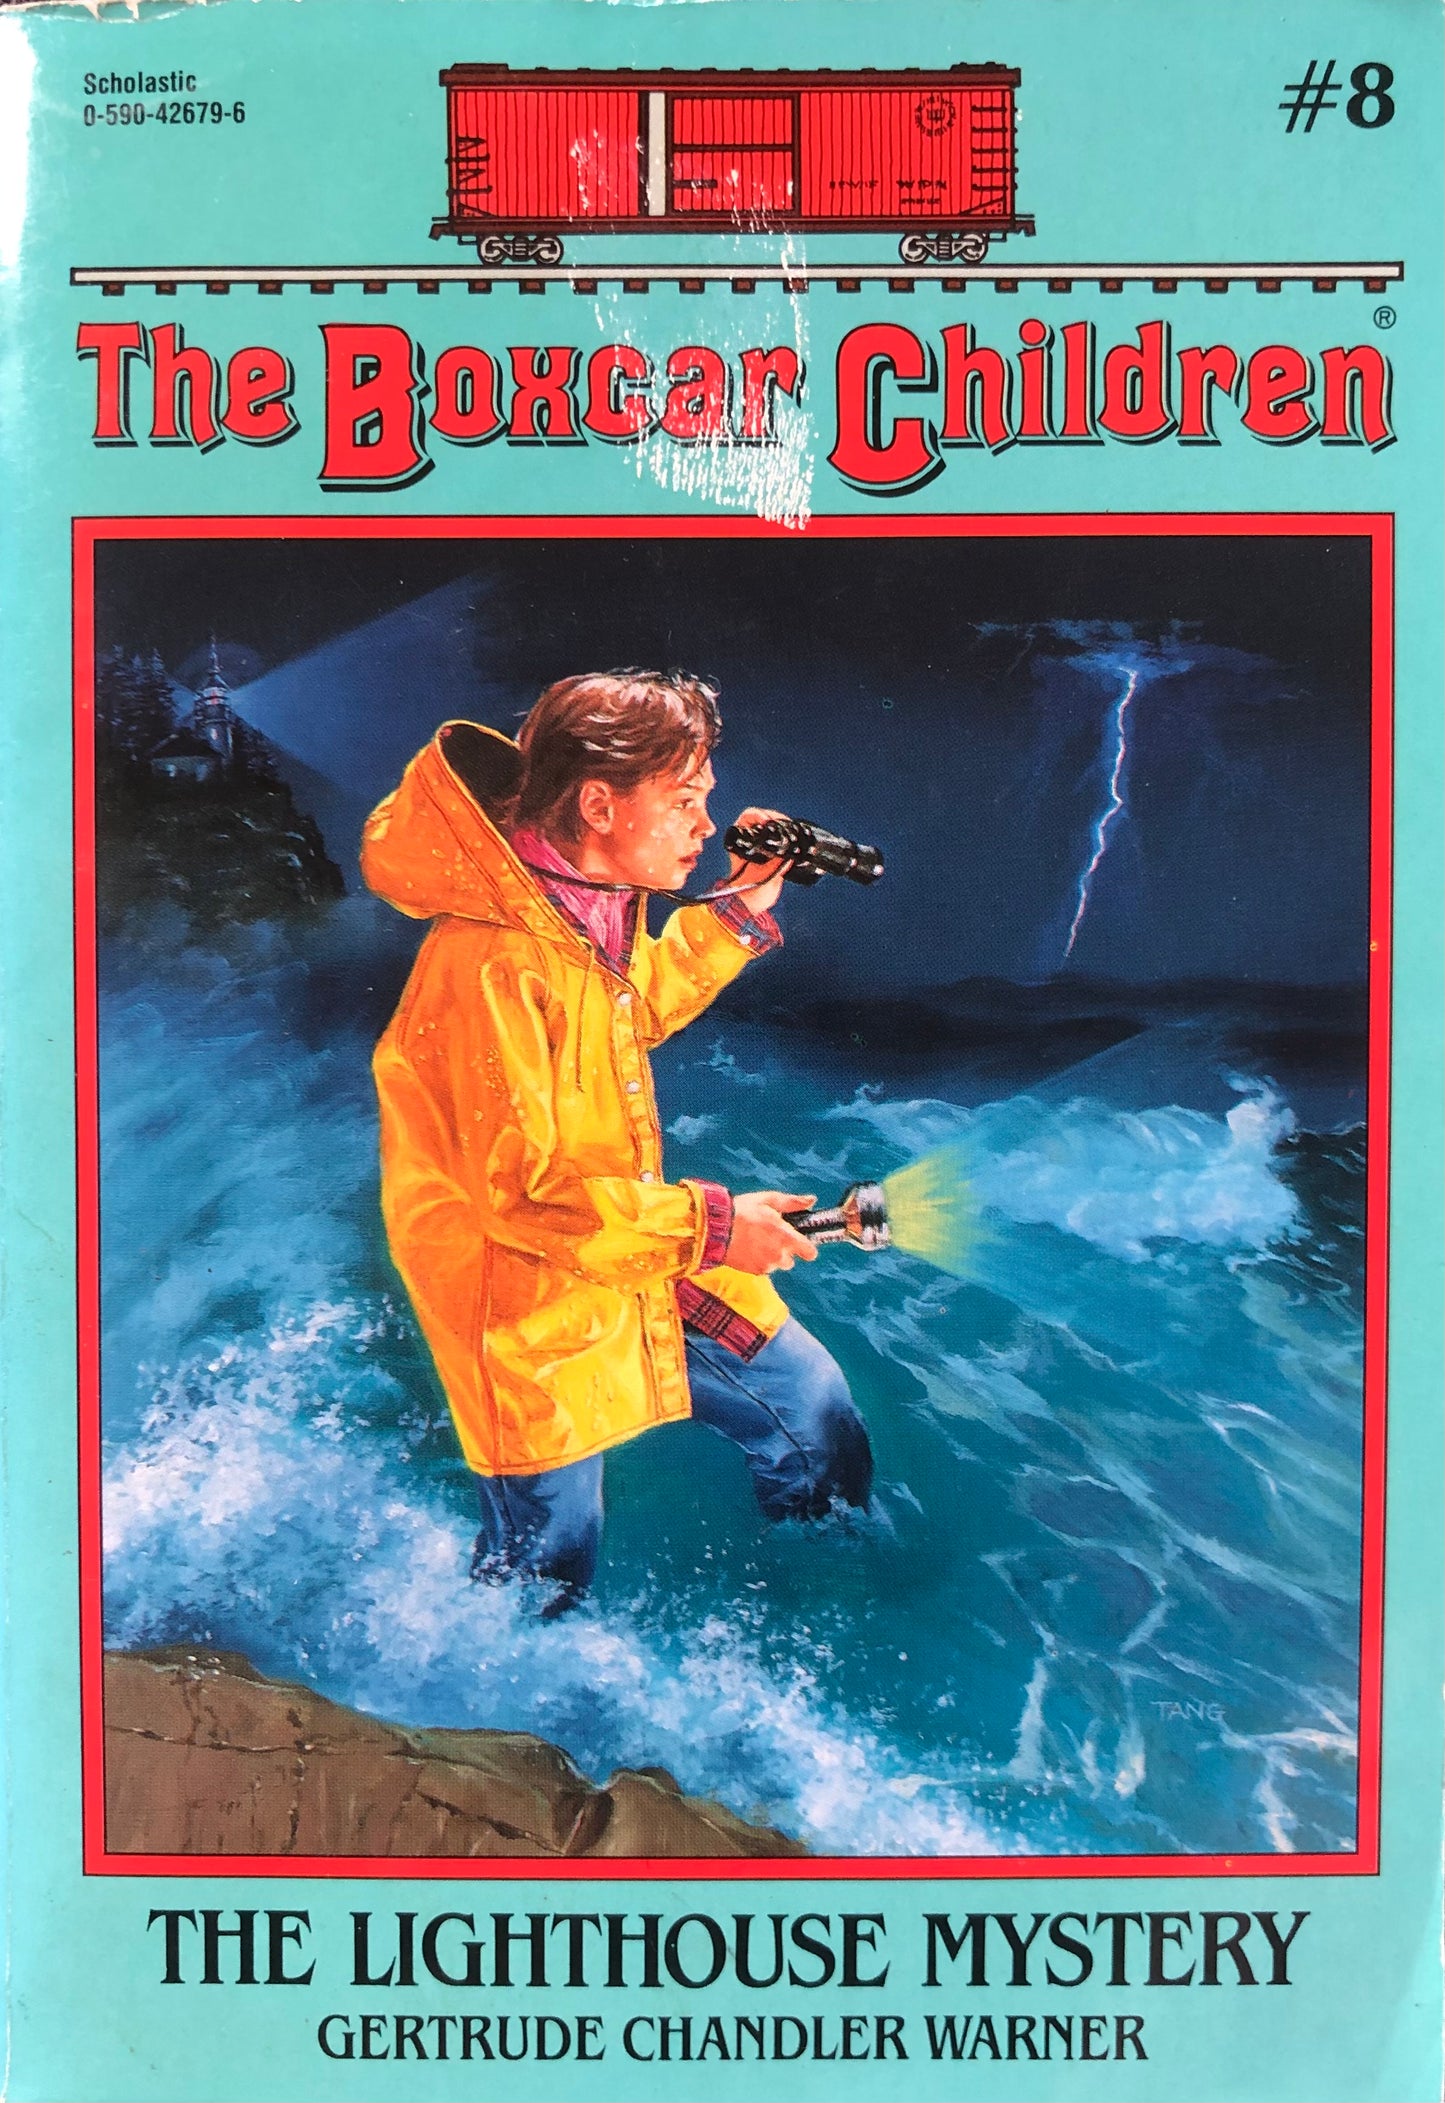 The Boxcar Children #08: The LightHouse Mystery by Gertrude Chandler Warner